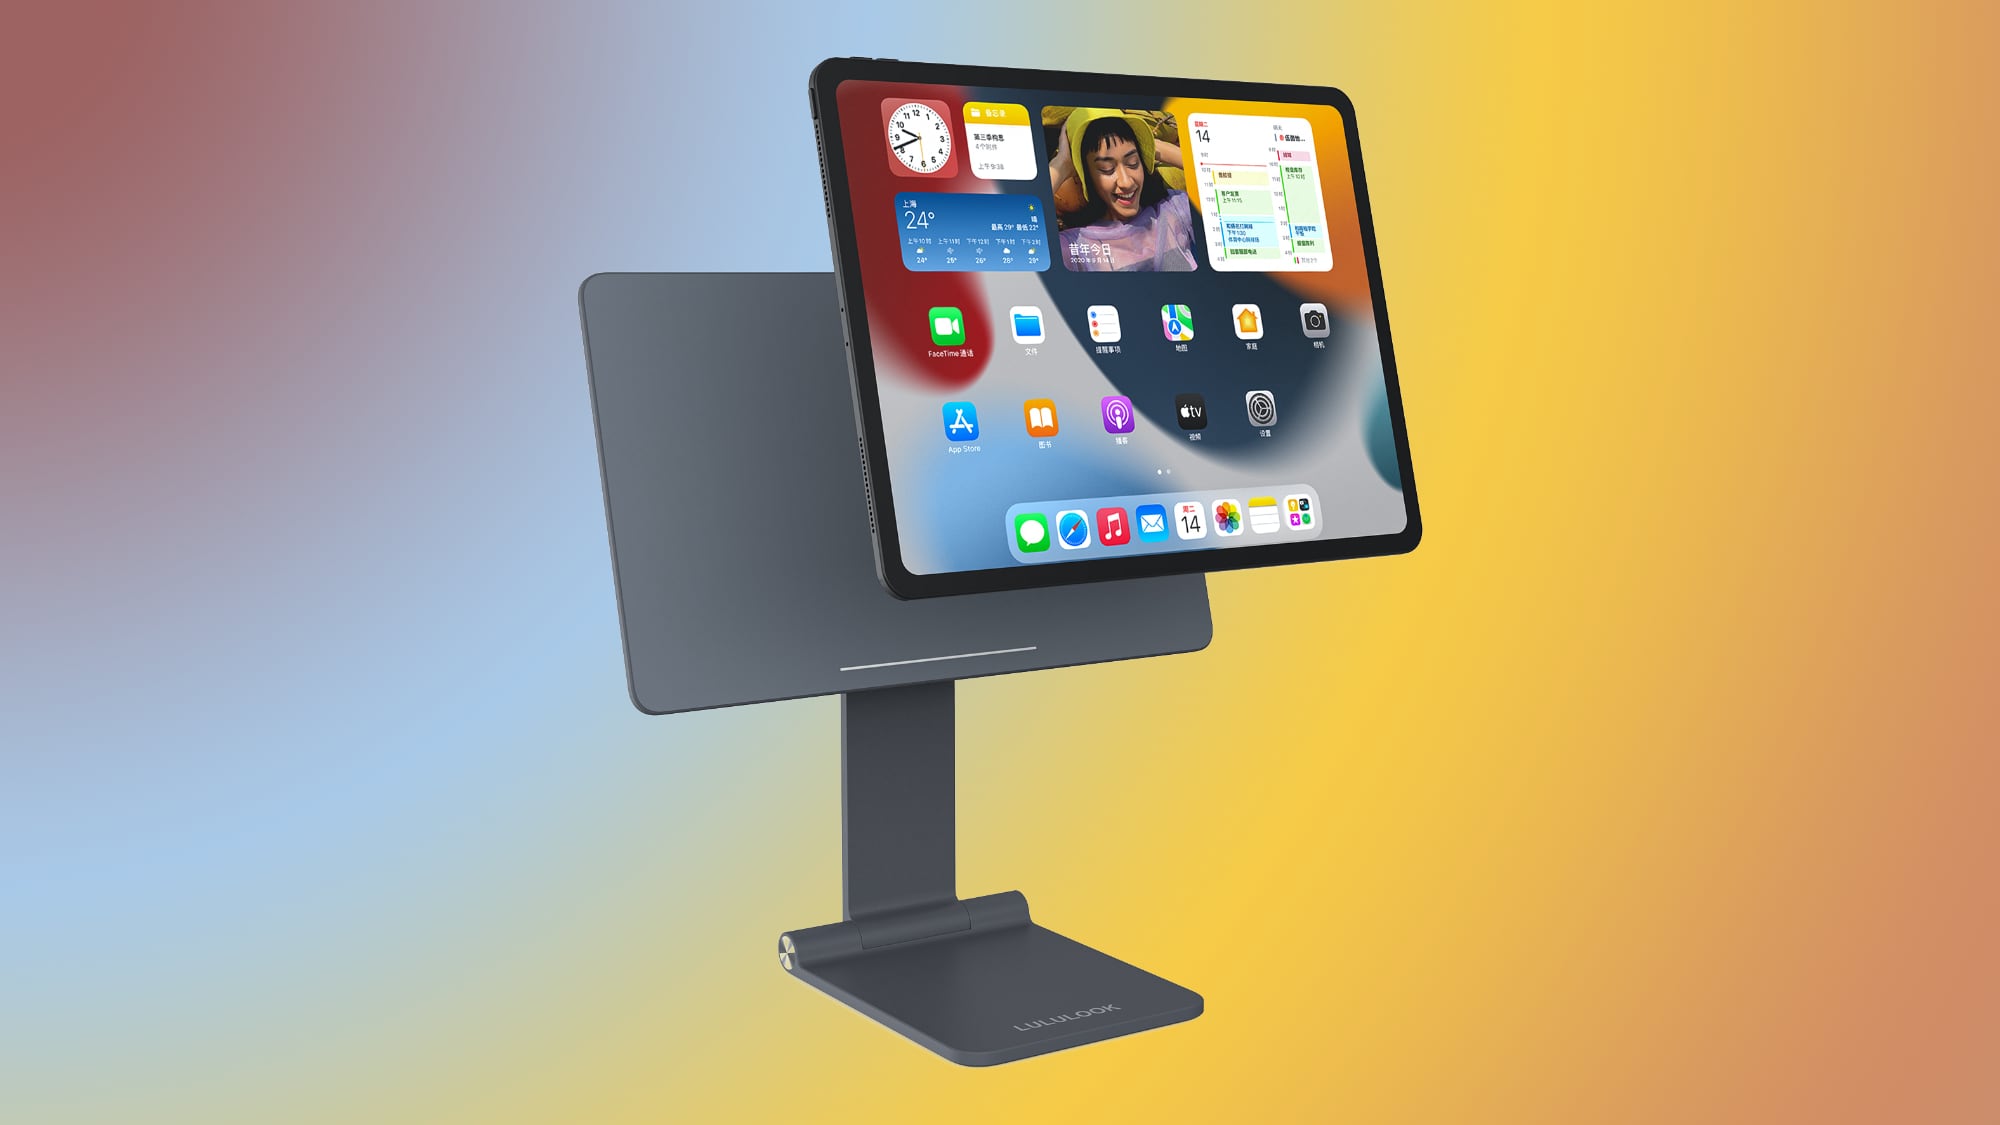 MacRumors Giveaway: Win an M2 iPad Pro and Magnetic Stand From Lululook